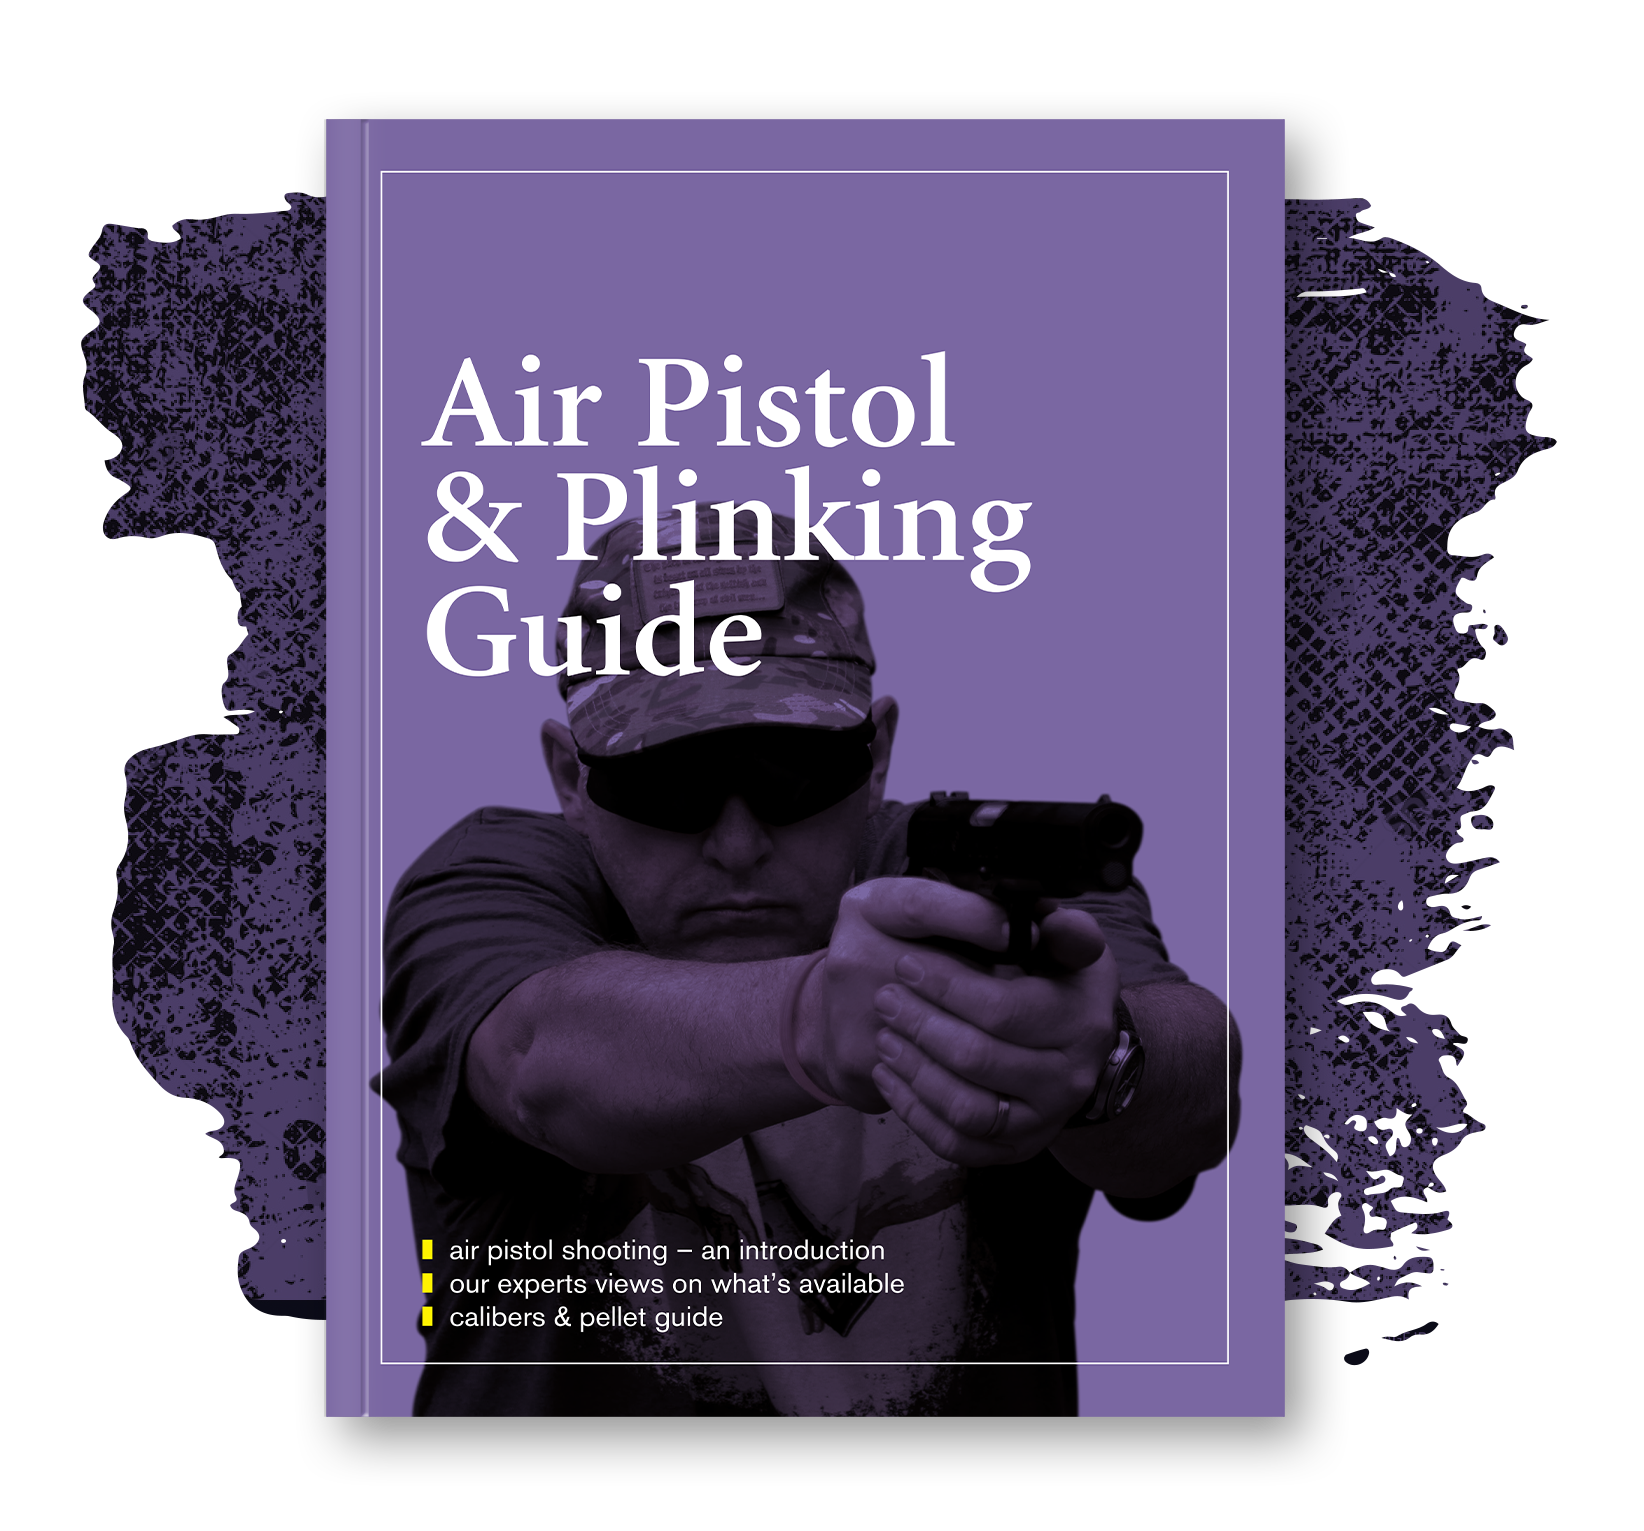 Air pistol and plinking guide